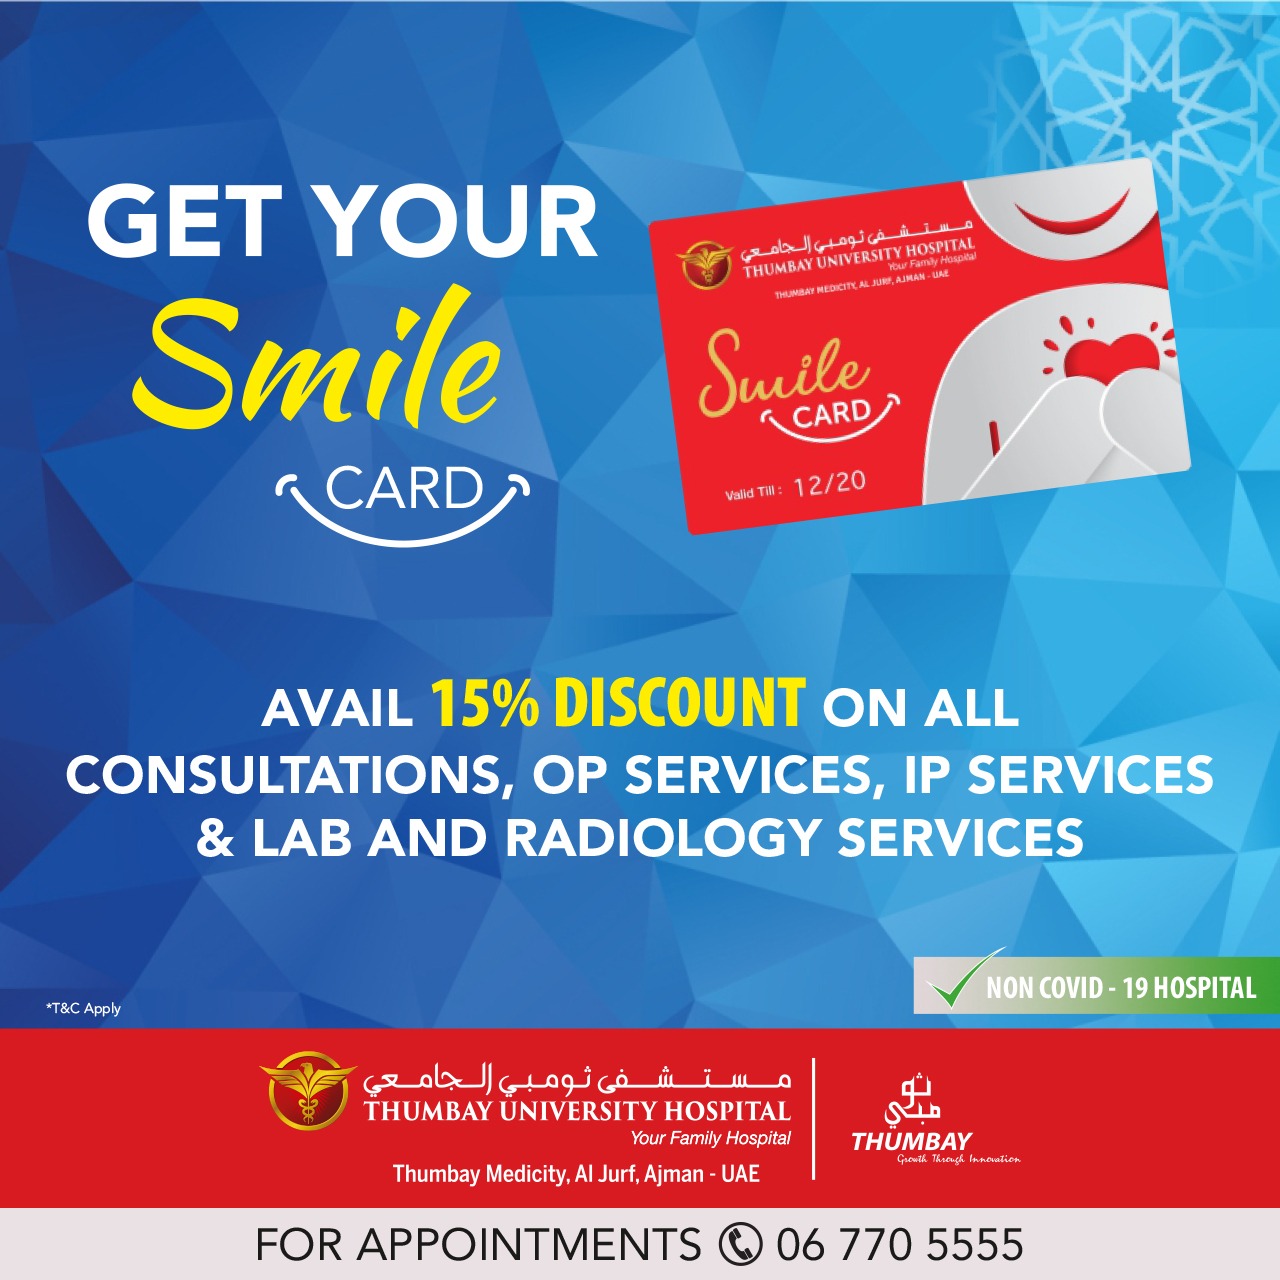 Get your Smile Card Offer